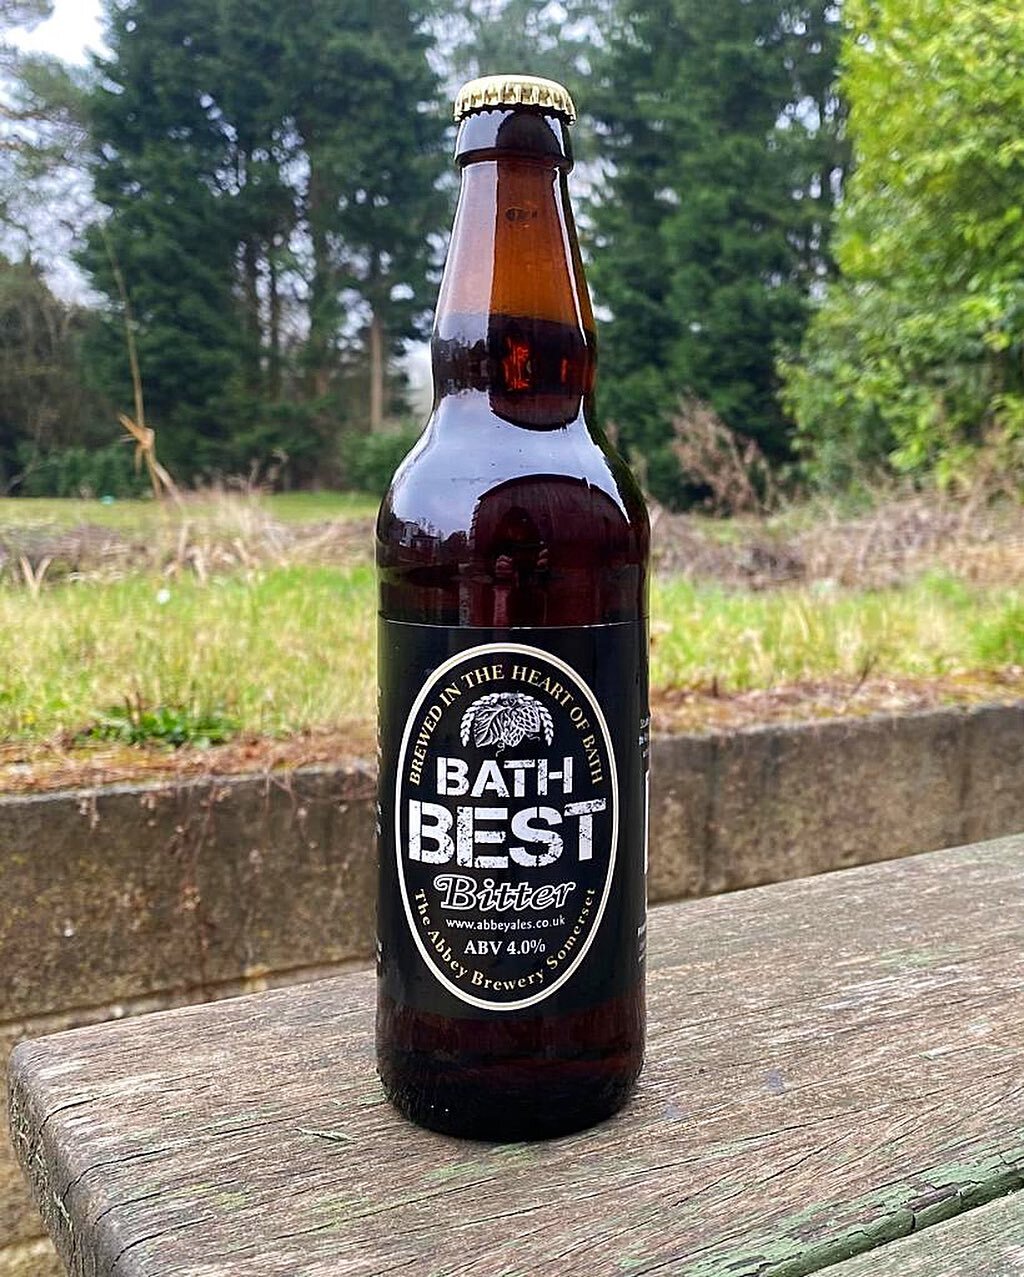 Bath Best Bitter from @abbeyalesbrewerybath Brewed in the heart of Bath, bottled in the heart of Hampshire🍻

You&rsquo;re good at Brewing. We&rsquo;re good at Bottling 

#CraftBeerBottling #CraftBeer #Brewery #bottlingplant #bottledbeer #beerbottle 